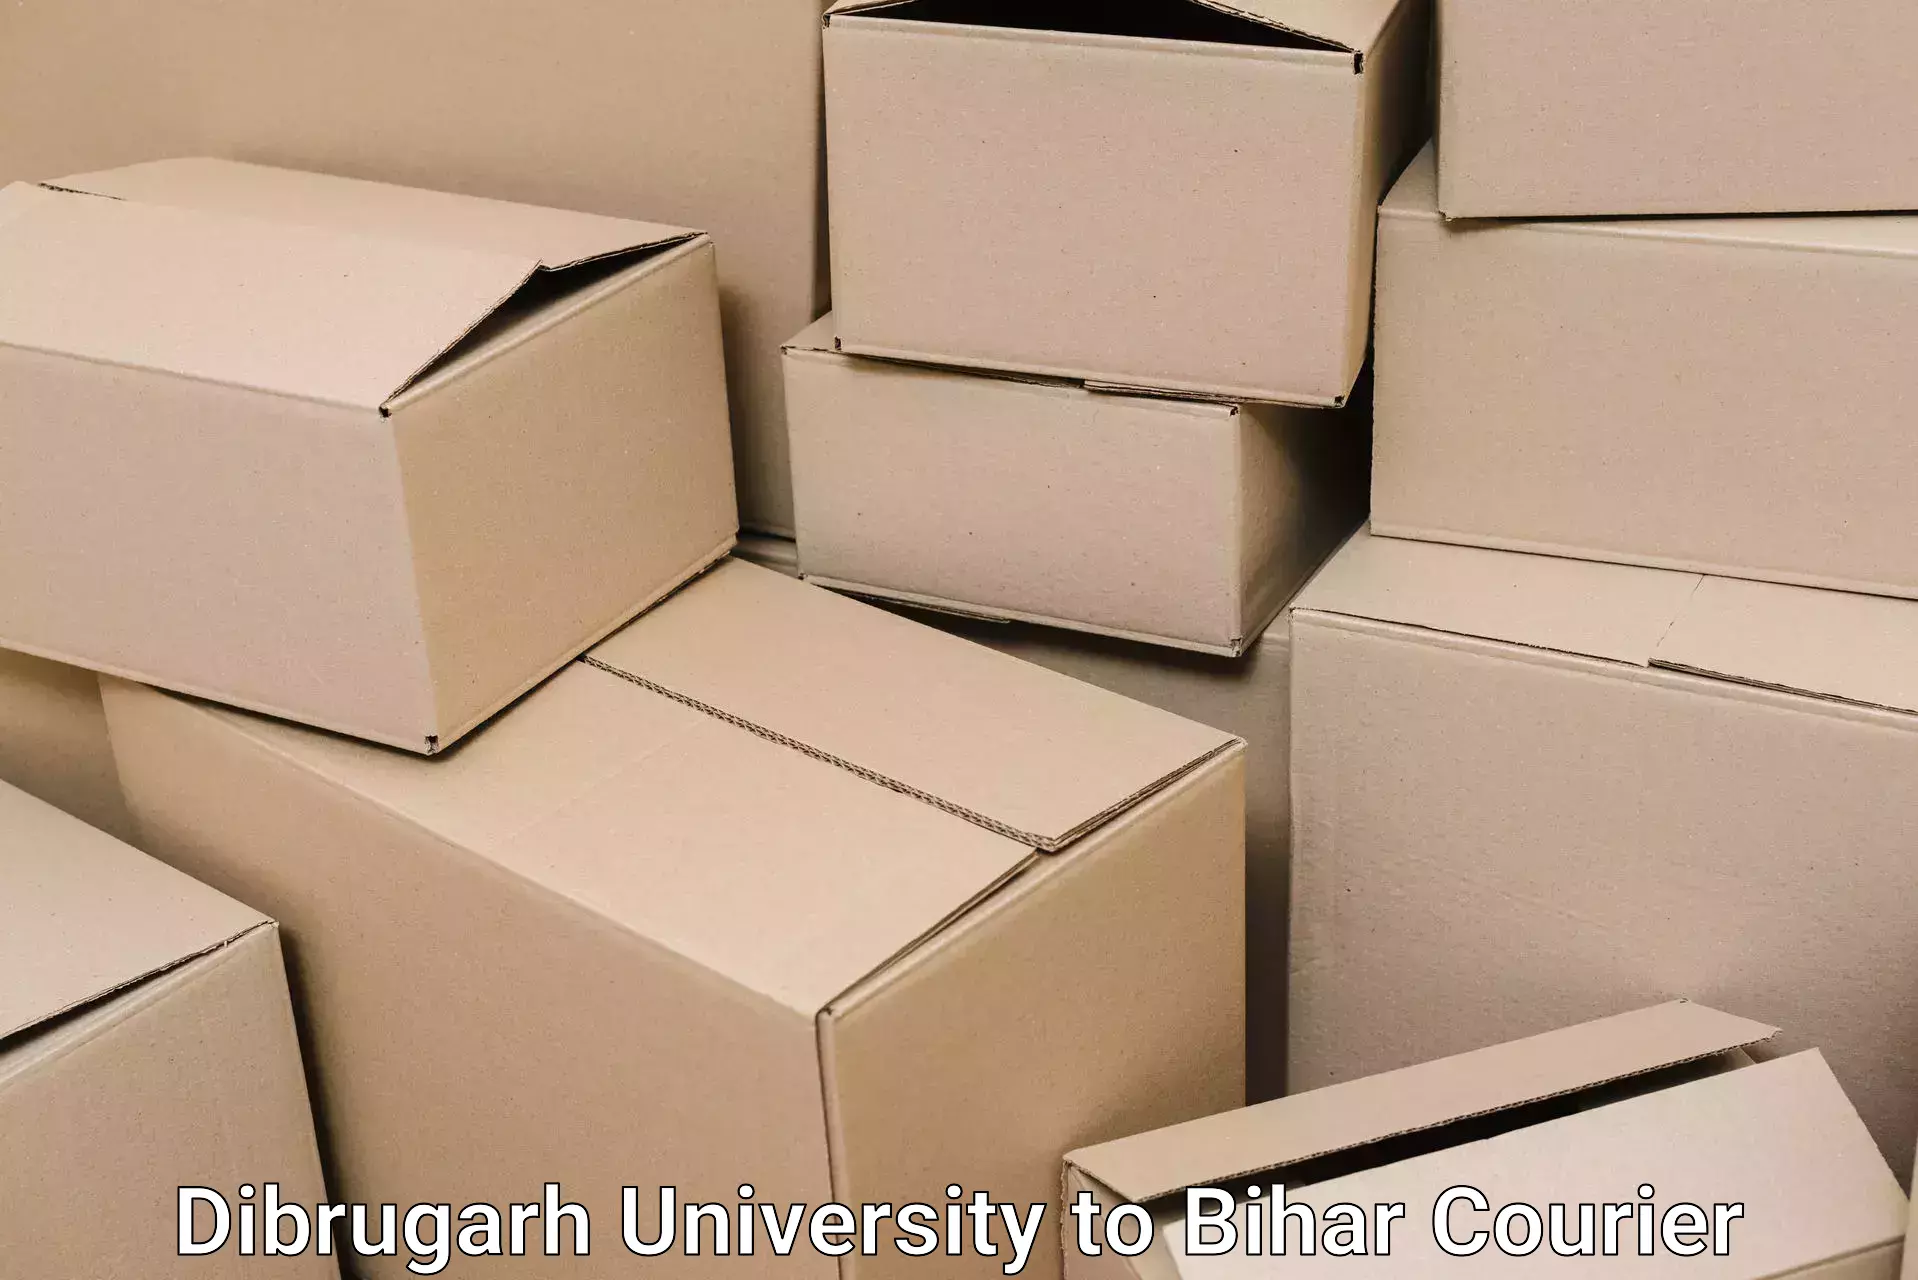 Dependable moving services in Dibrugarh University to Bhawanipur Rajdham